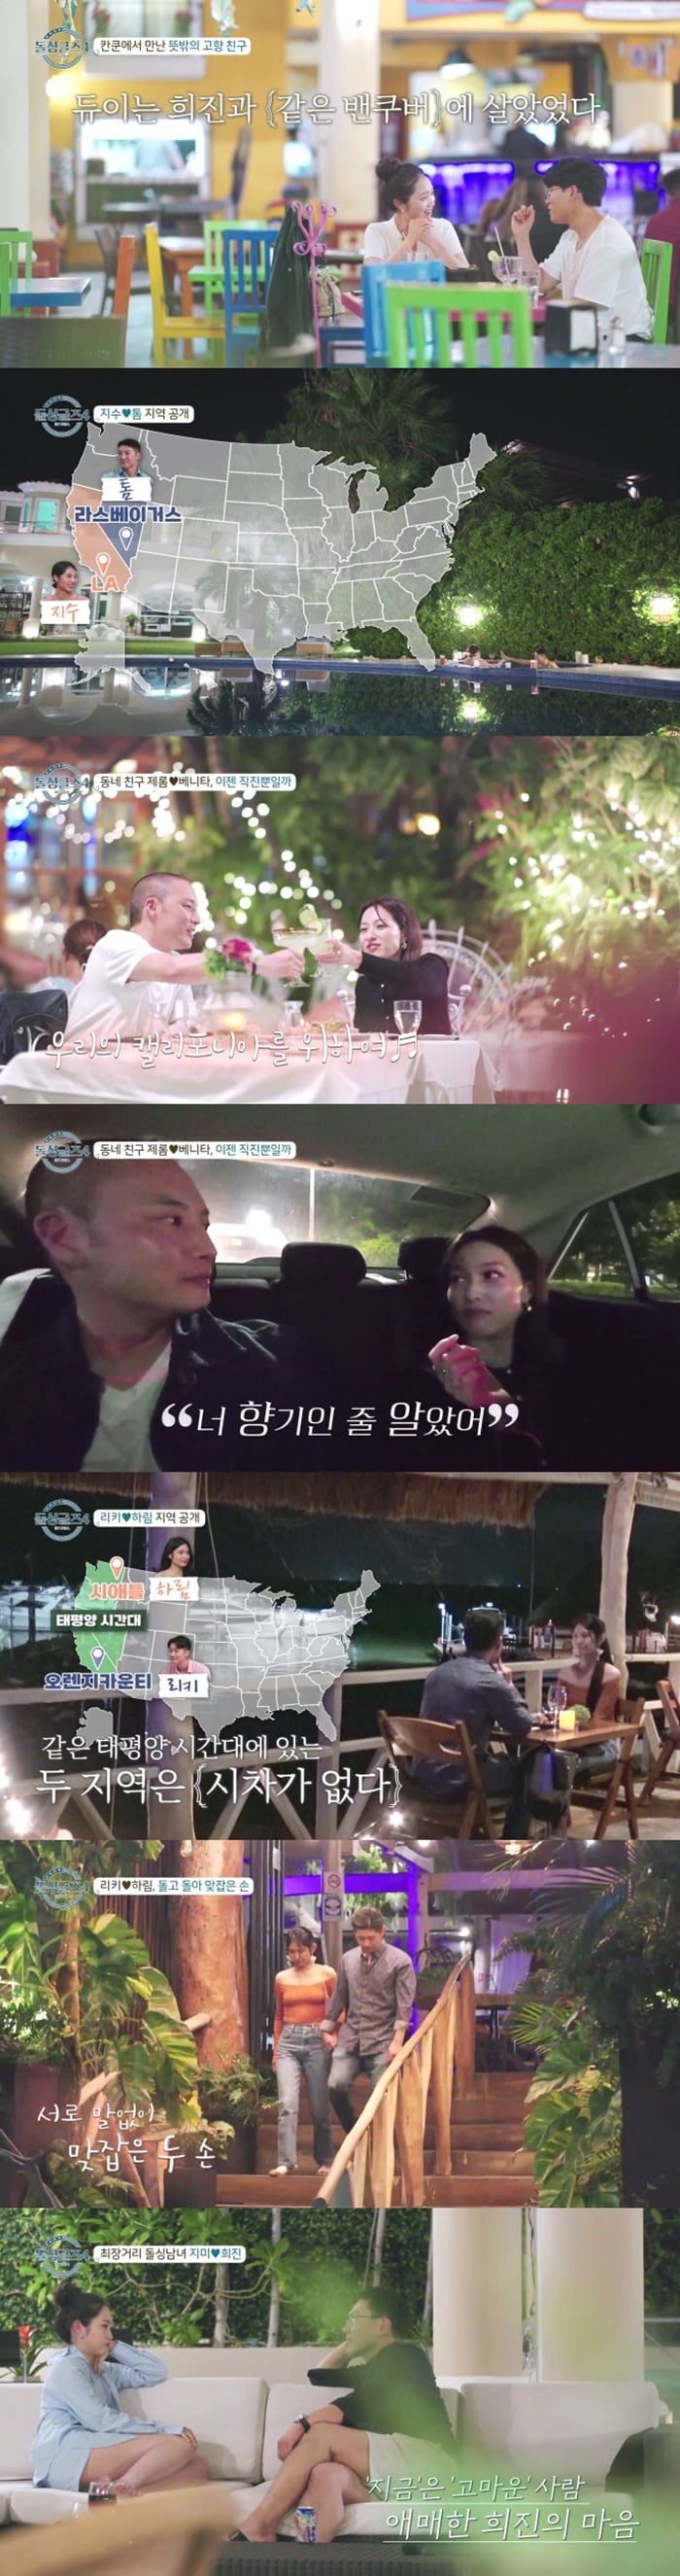 Bae Yoon-jung's ex-husband, Jerome, goes straight after awakening